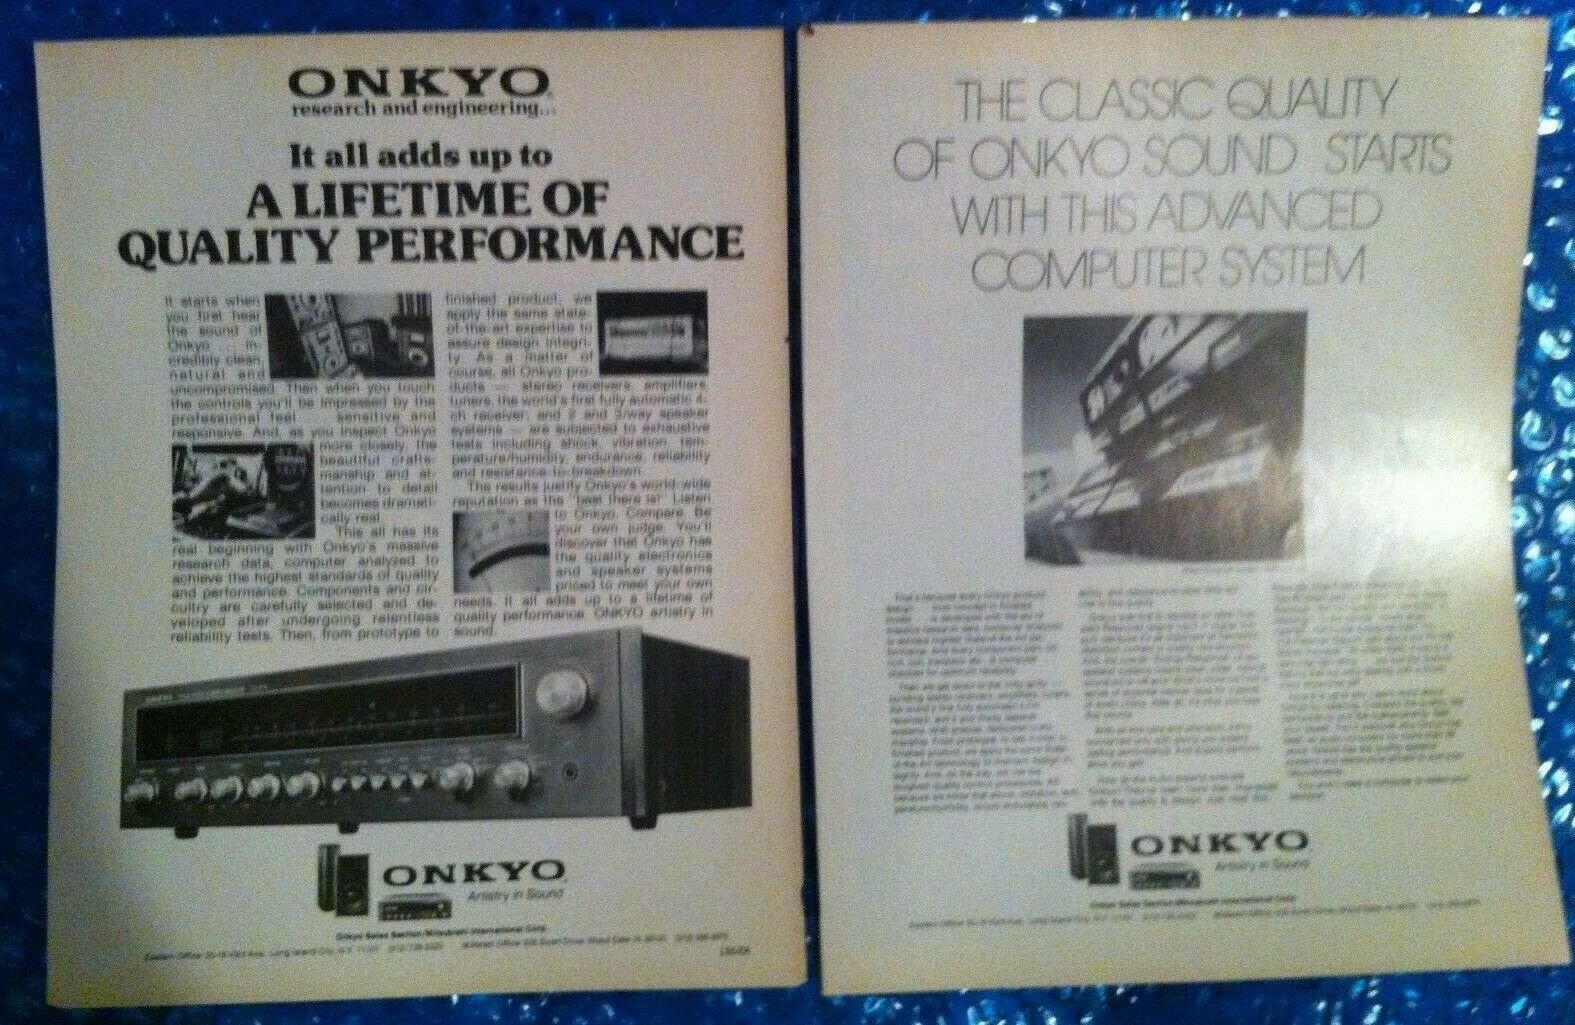 1975 2 Original Vintage Print Ads Lot ONKYO stereo receivers amplifiers tuners